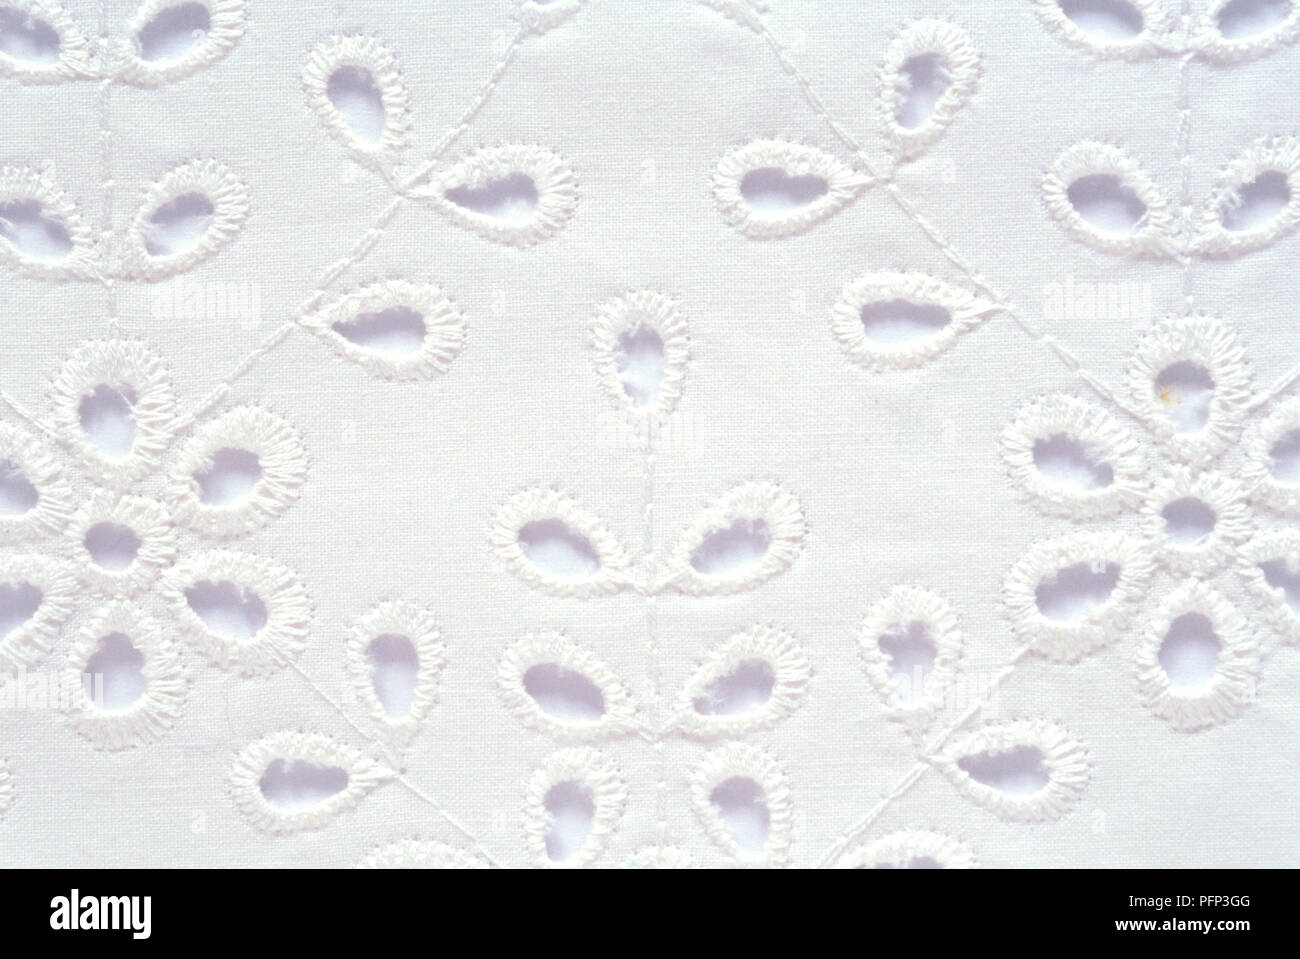 Eyelets embroidered on white fabric using Broderie Anglaise needlework ...